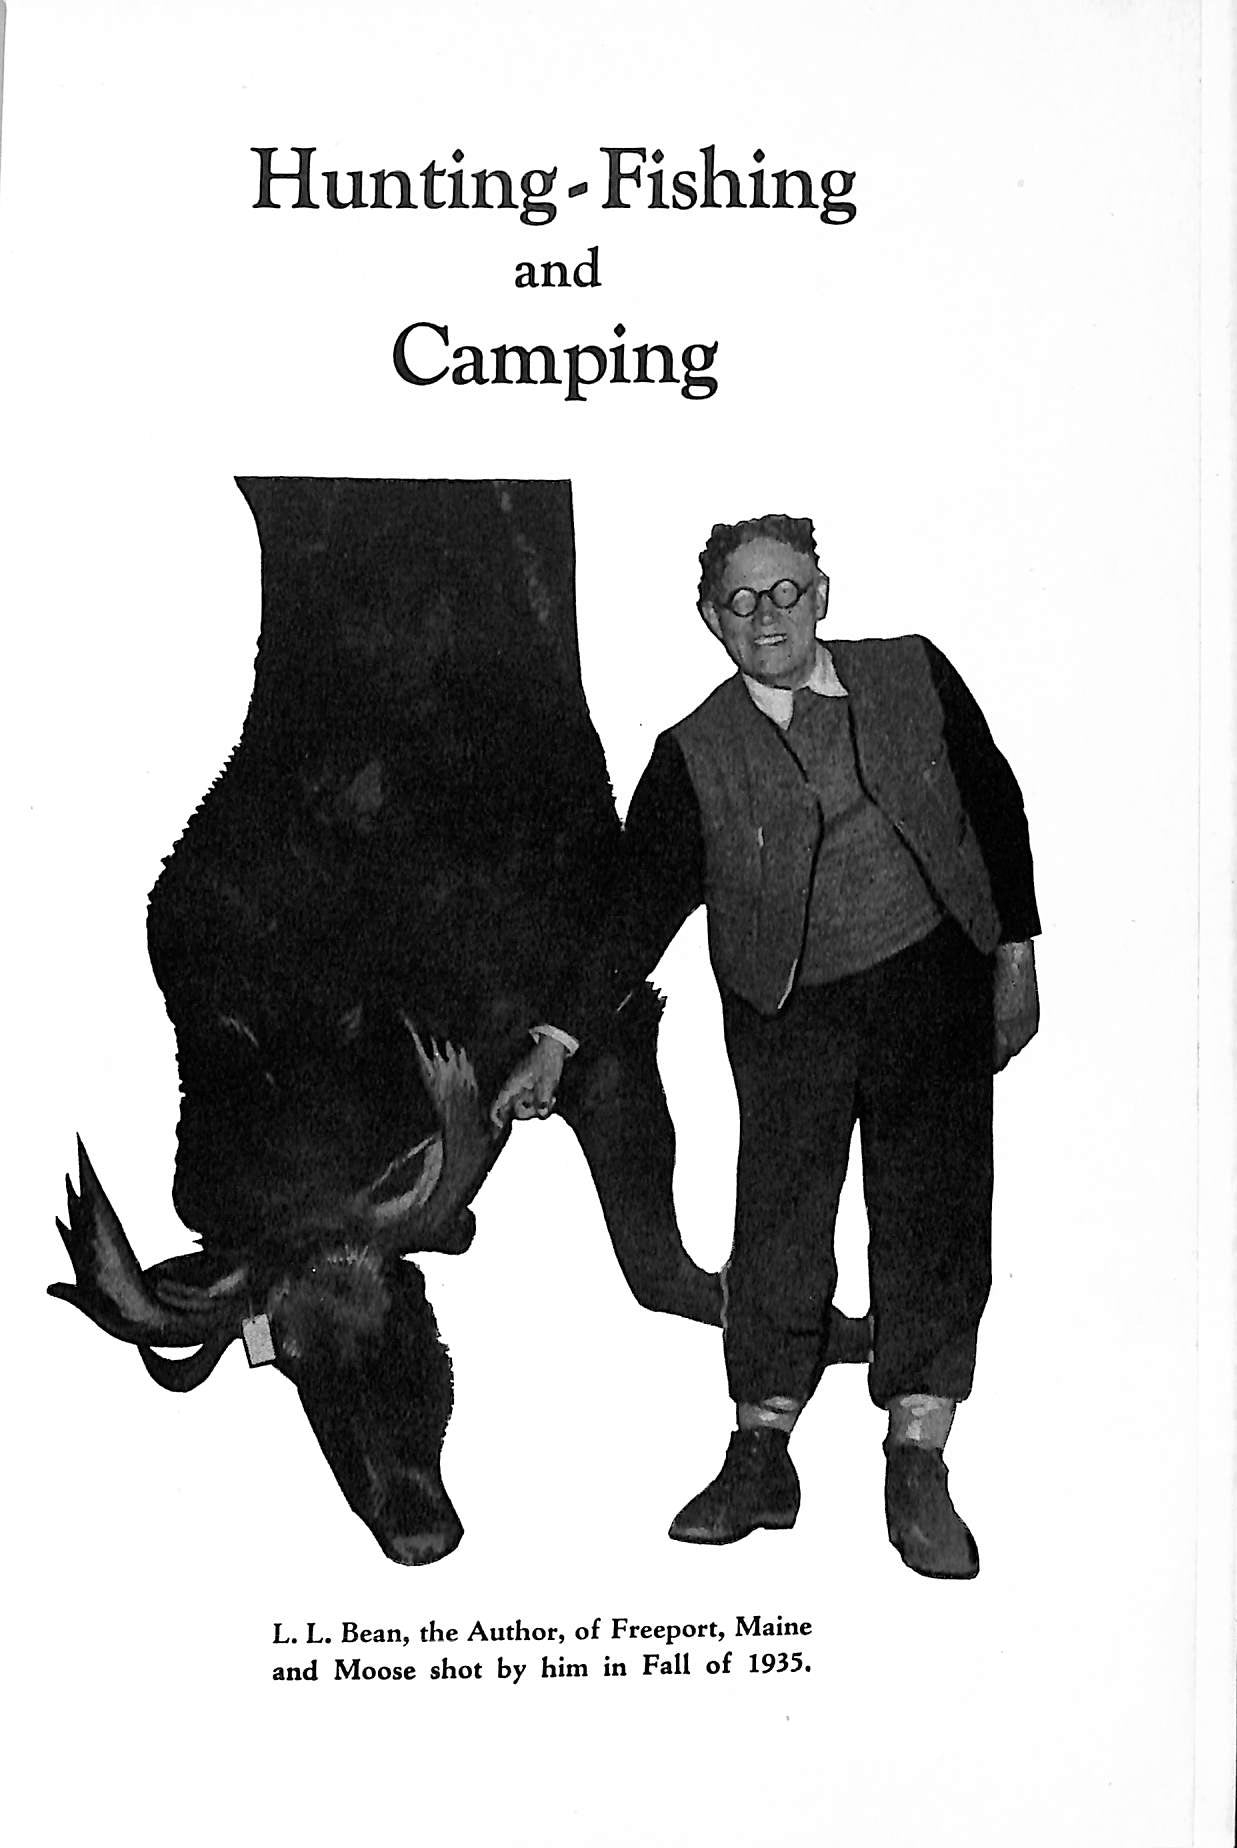 Hunting-Fishing and Camping by L.L. Bean 1947 (SOLD)